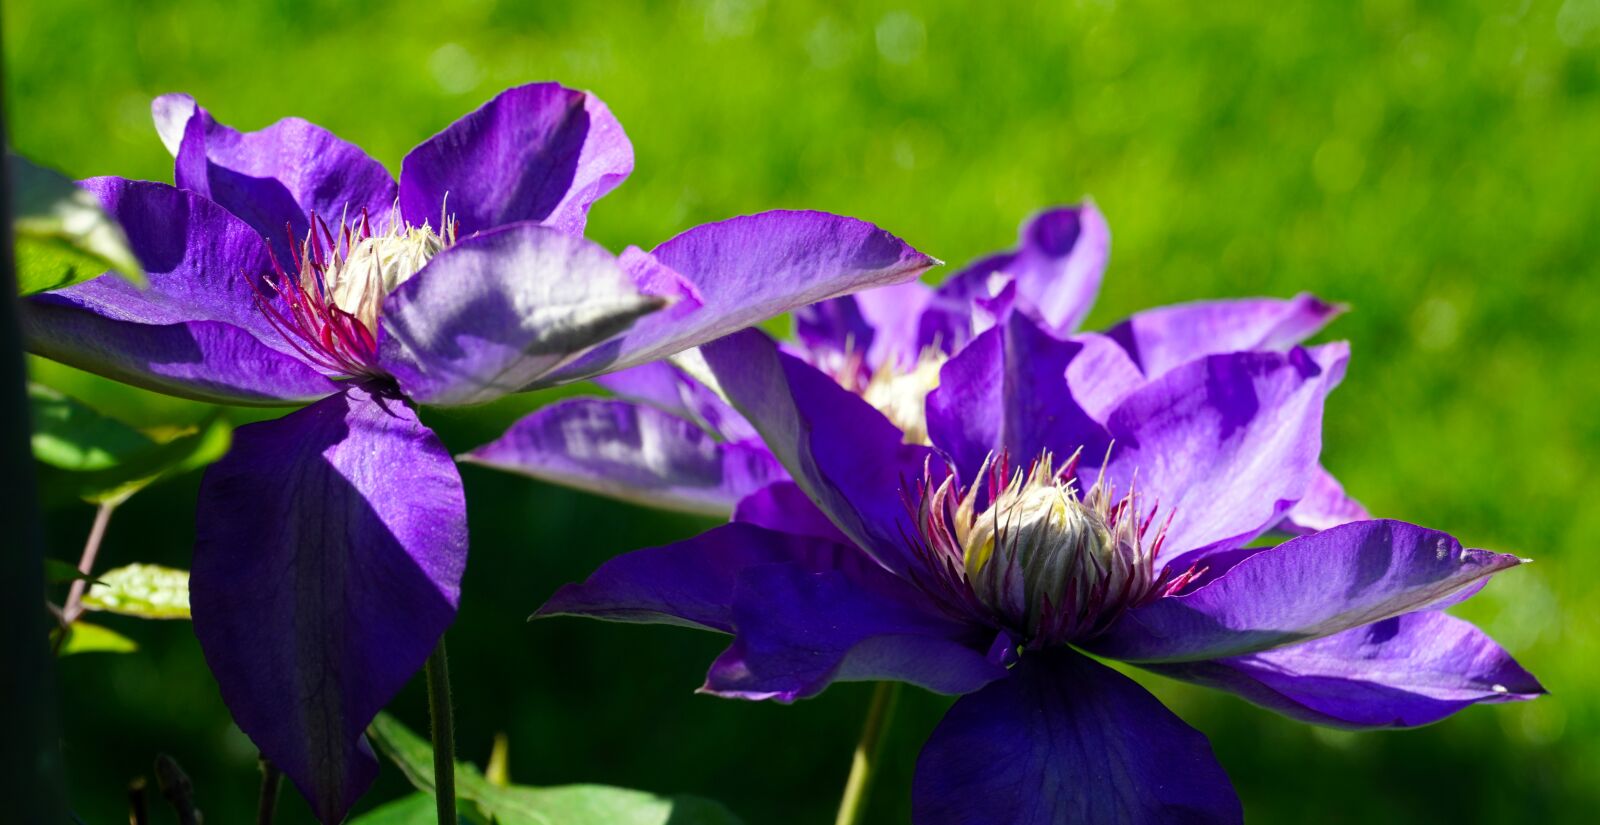 Sony a6400 sample photo. Clematis, flower, nature photography